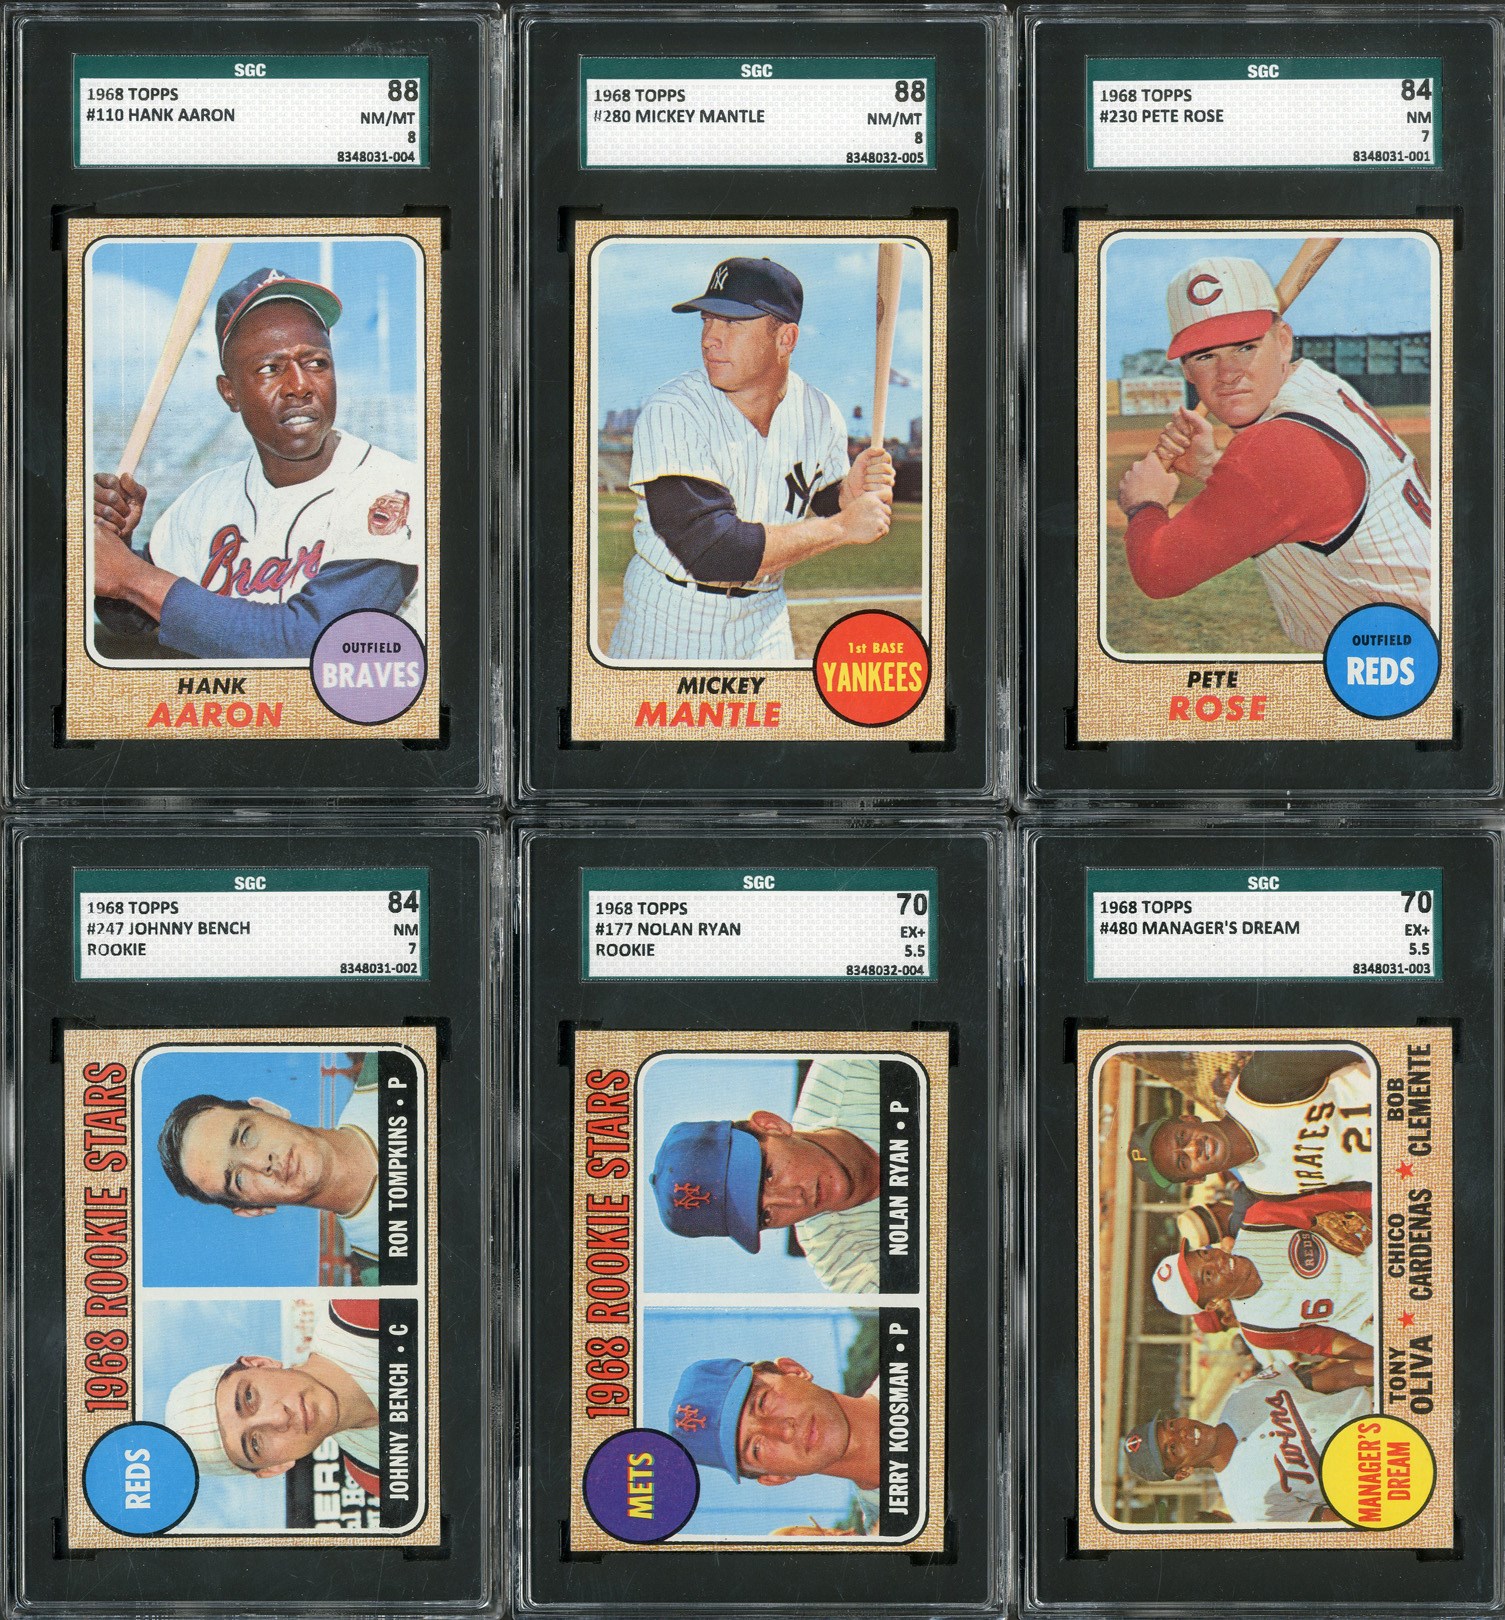 - 1968 Topps Complete Set (598 Cards - 6 SGC Graded)